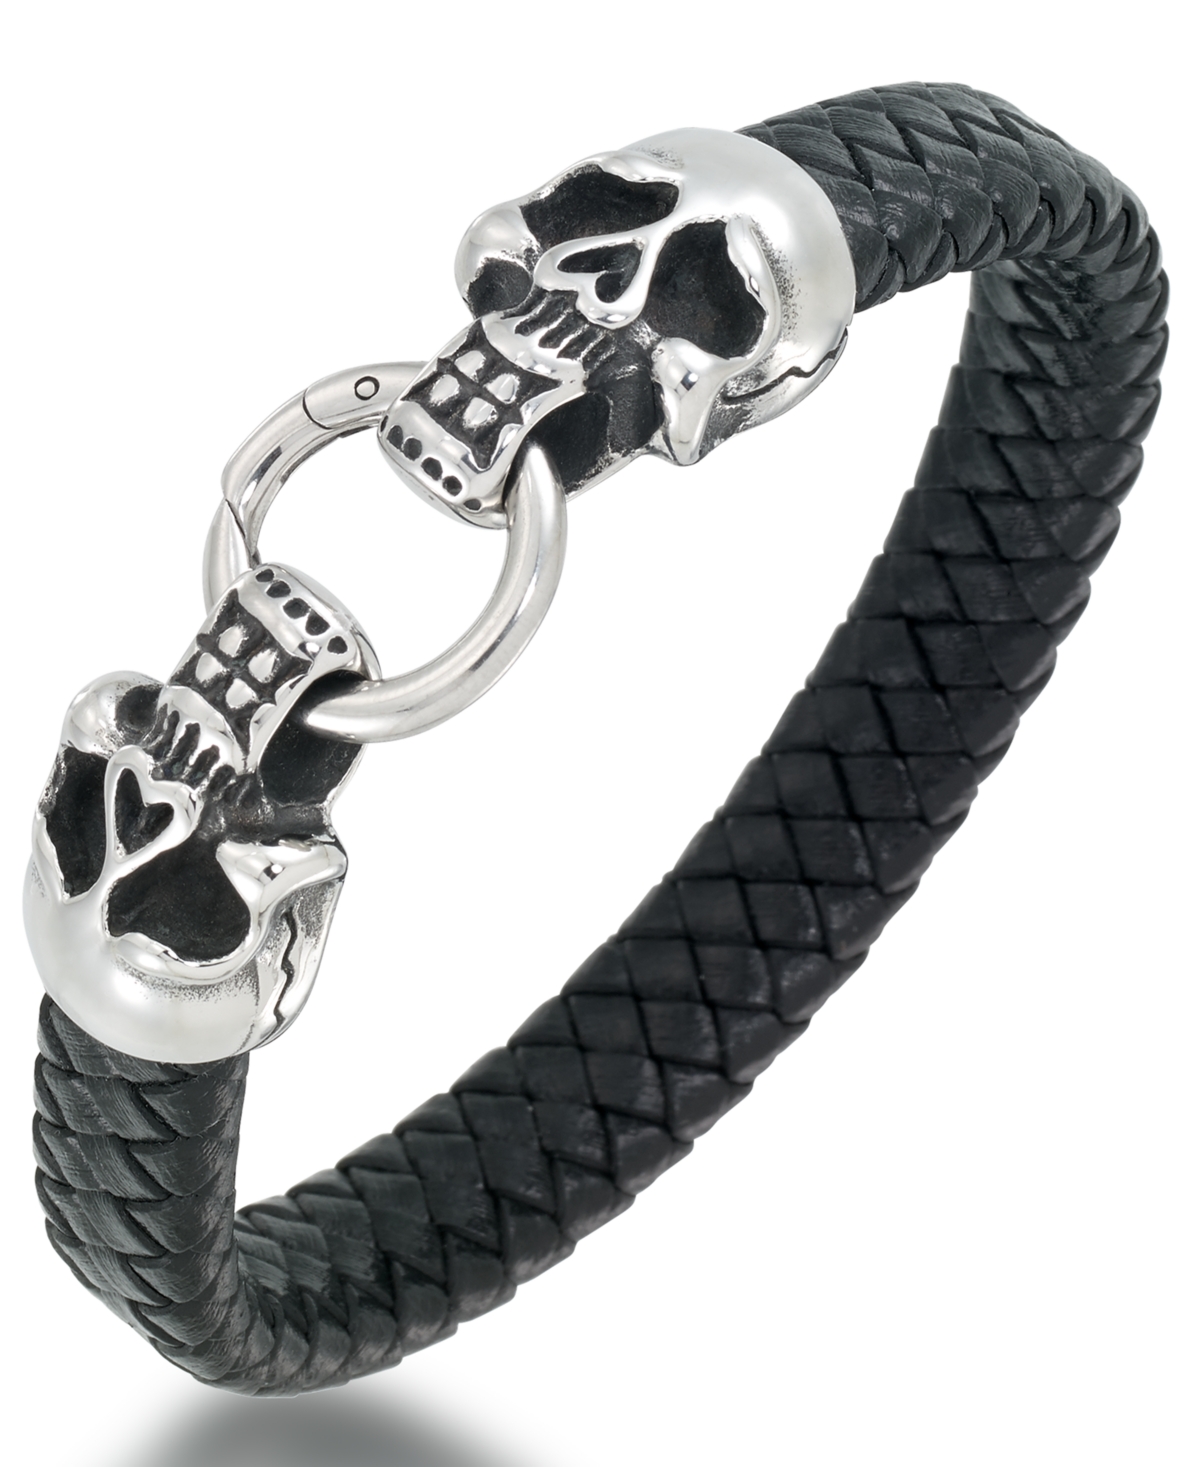 Andrew Charles by Andy Hilfiger Men's Leather Skull Head Bracelet in Stainless Steel